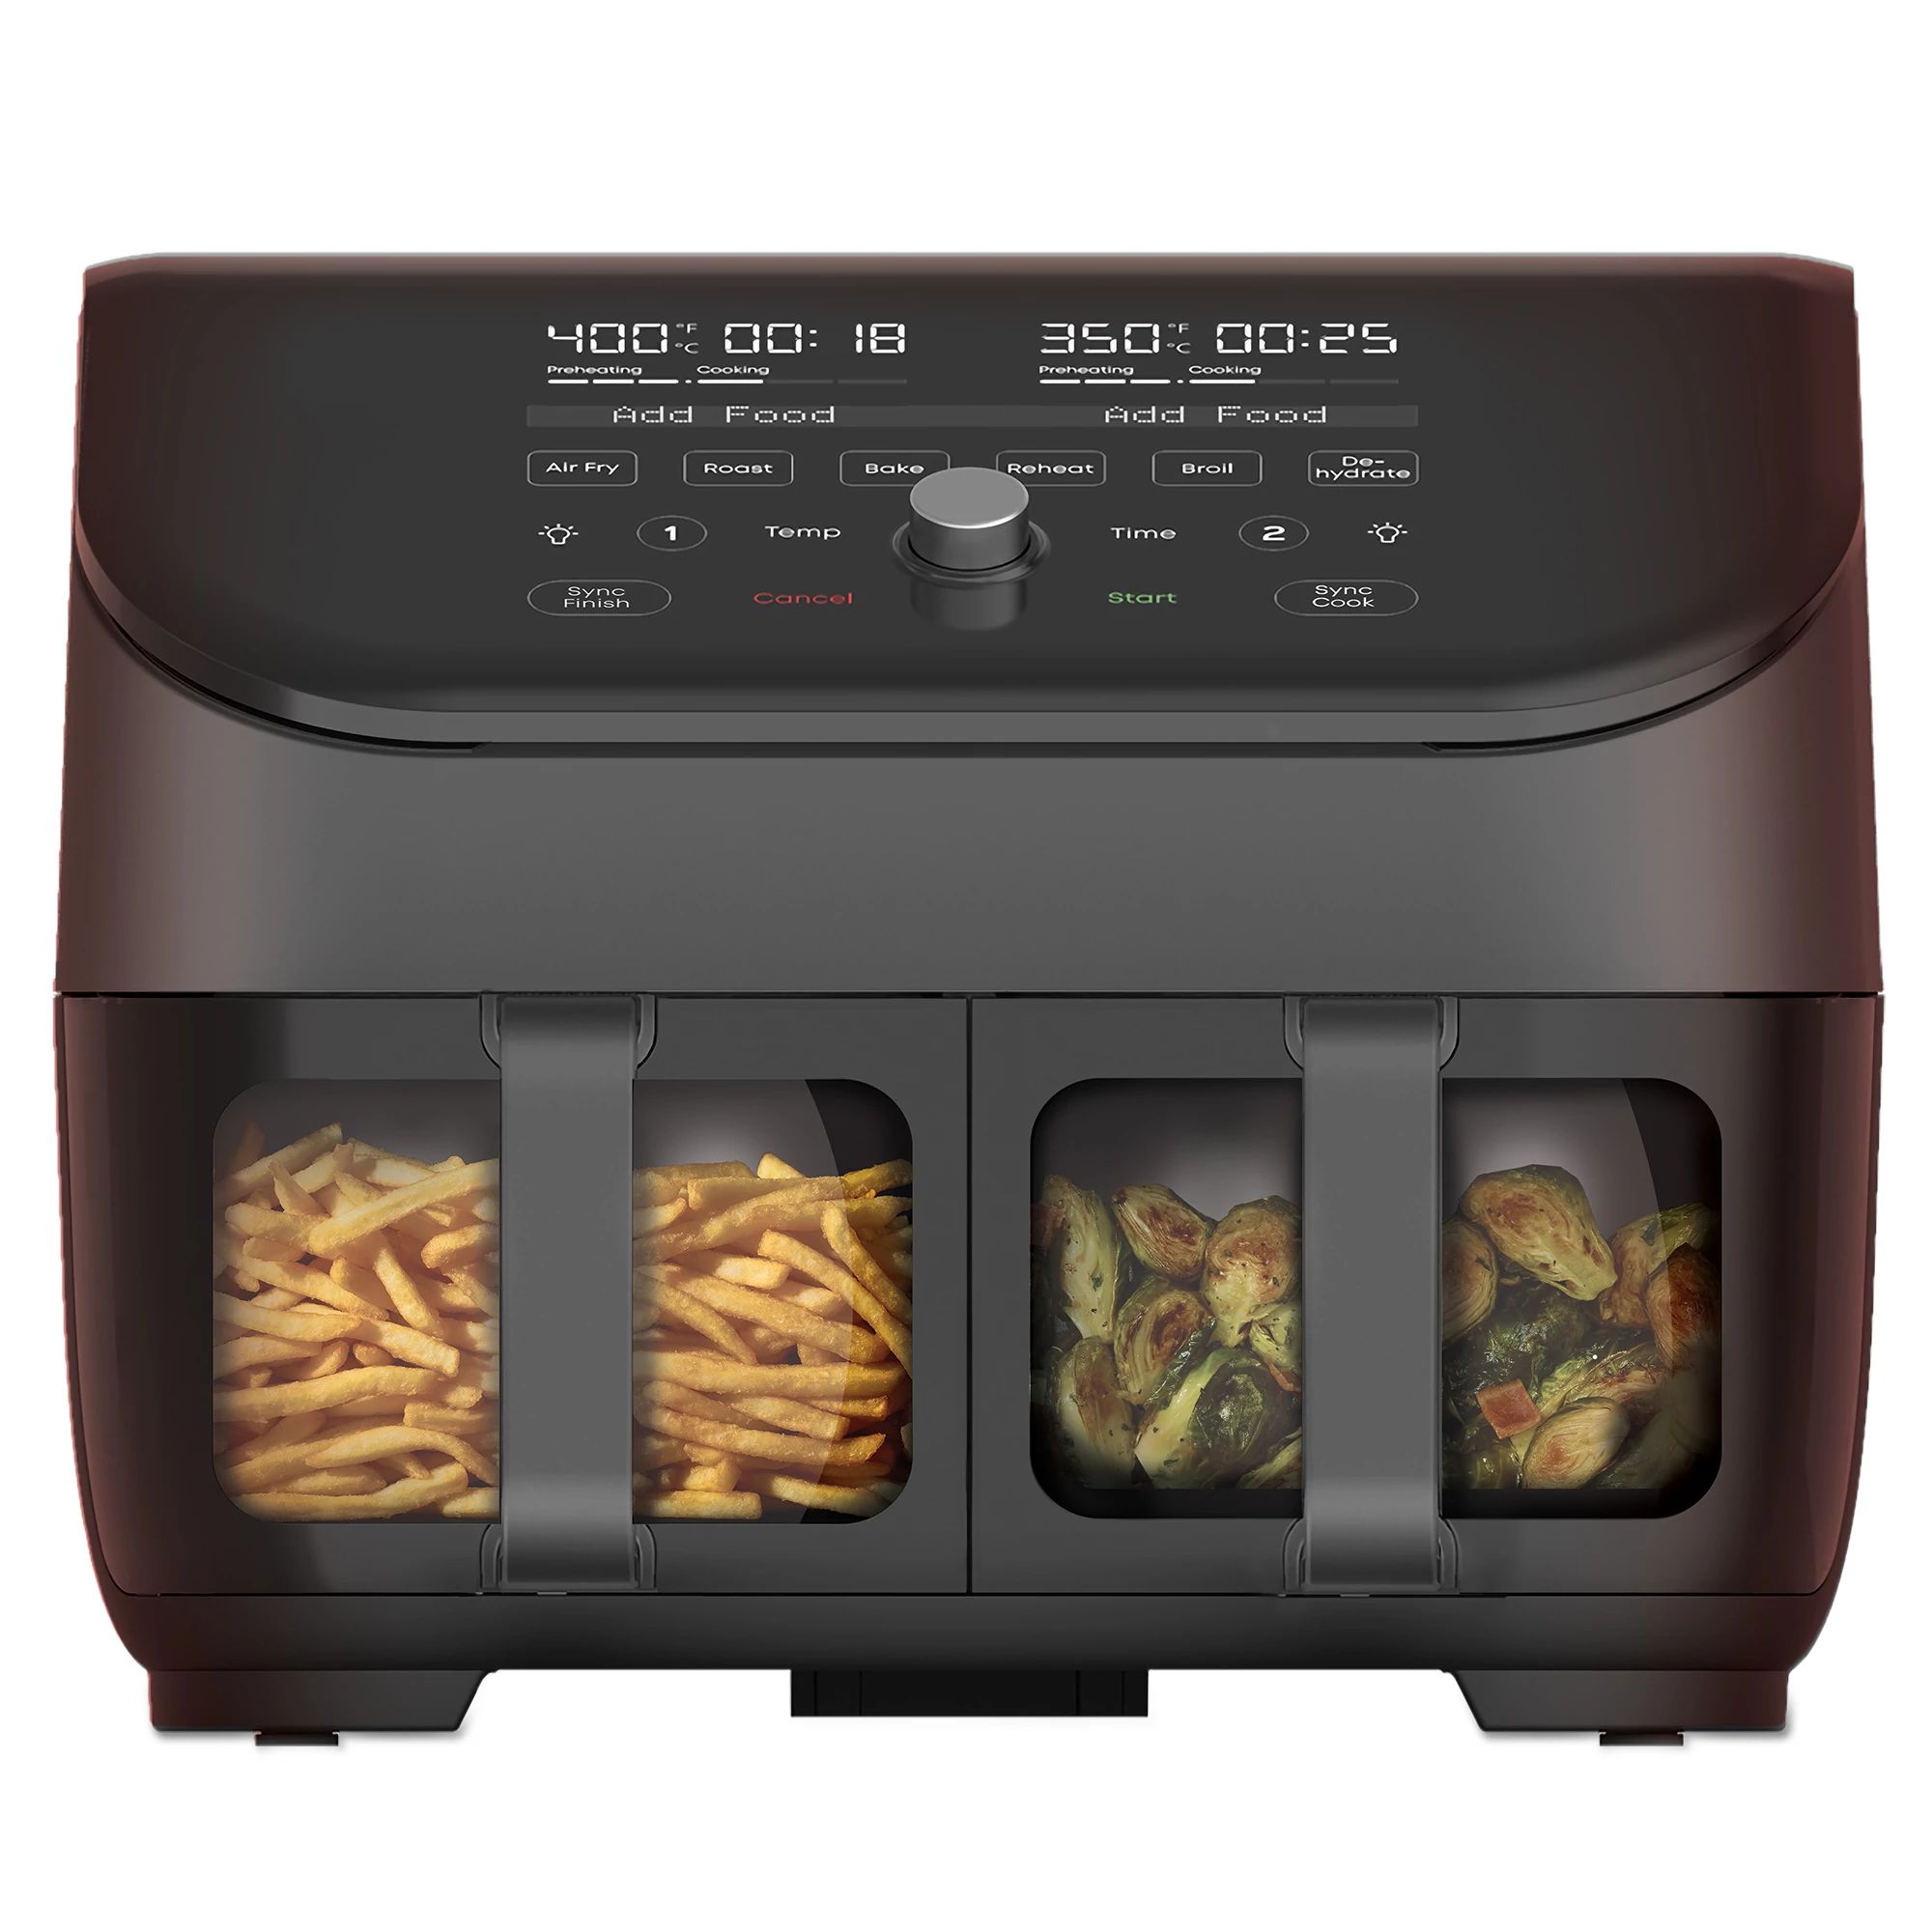 5 reasons why I'm switching to a dual-basket air fryer